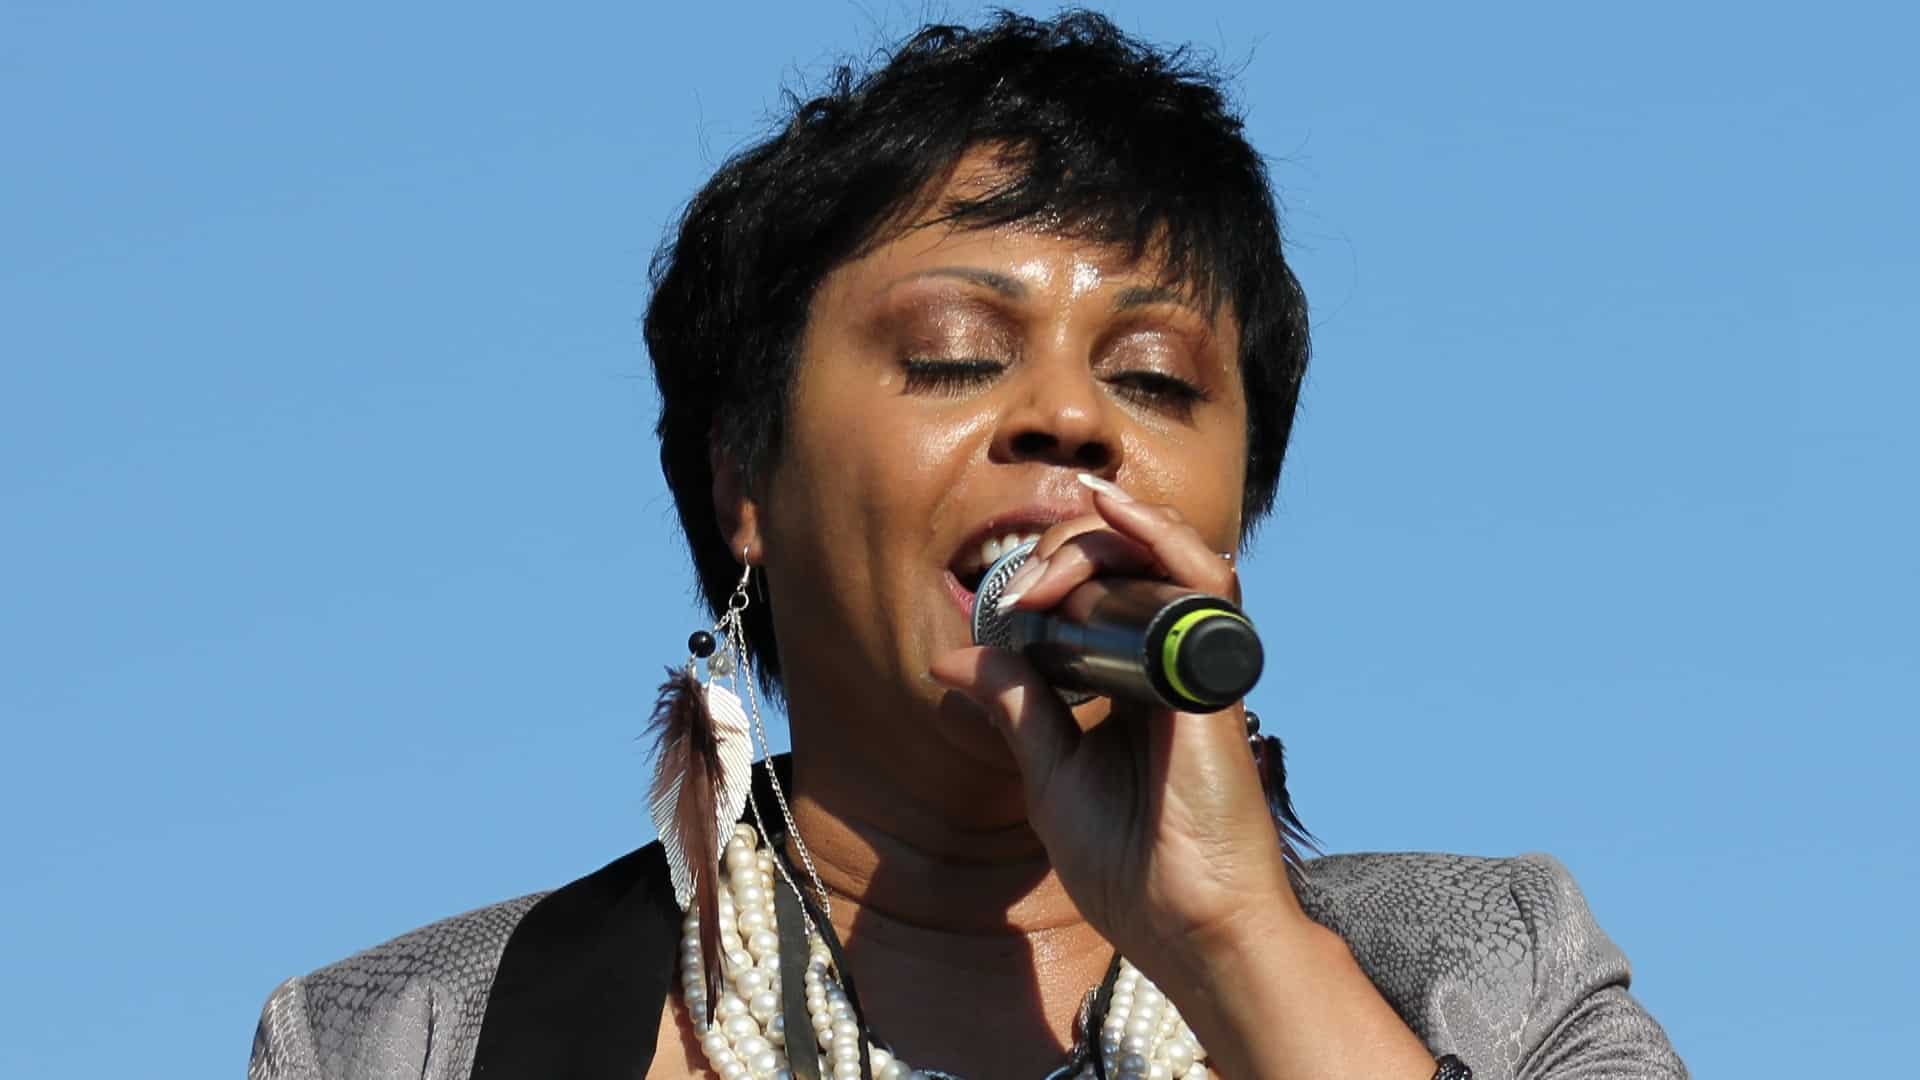 Crystal Waters’ 90’s hit ‘Gypsy Woman’ climbs Beatport Top 100 nearly 33 years after release